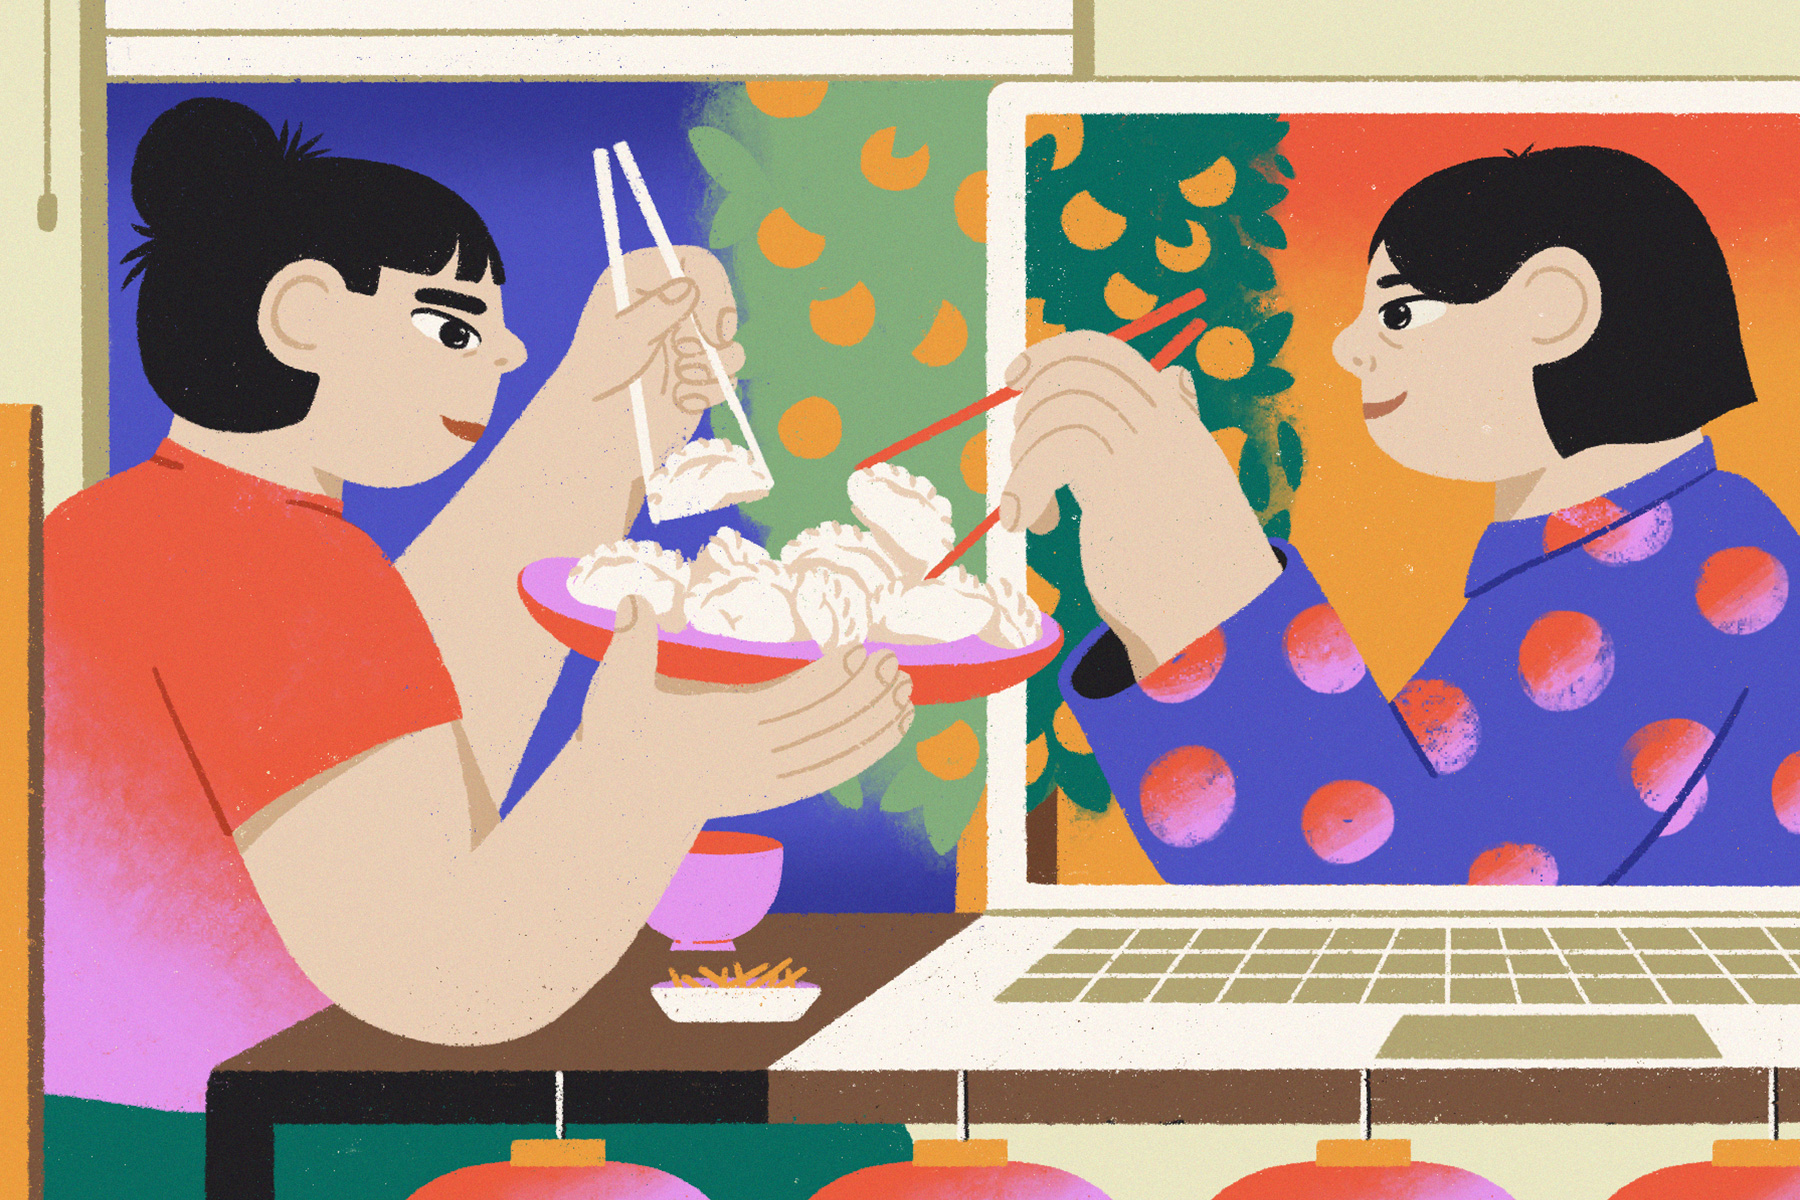 An illustration of two people sharing a plate of dumplings, one of whom through a Zoom screen on a laptop